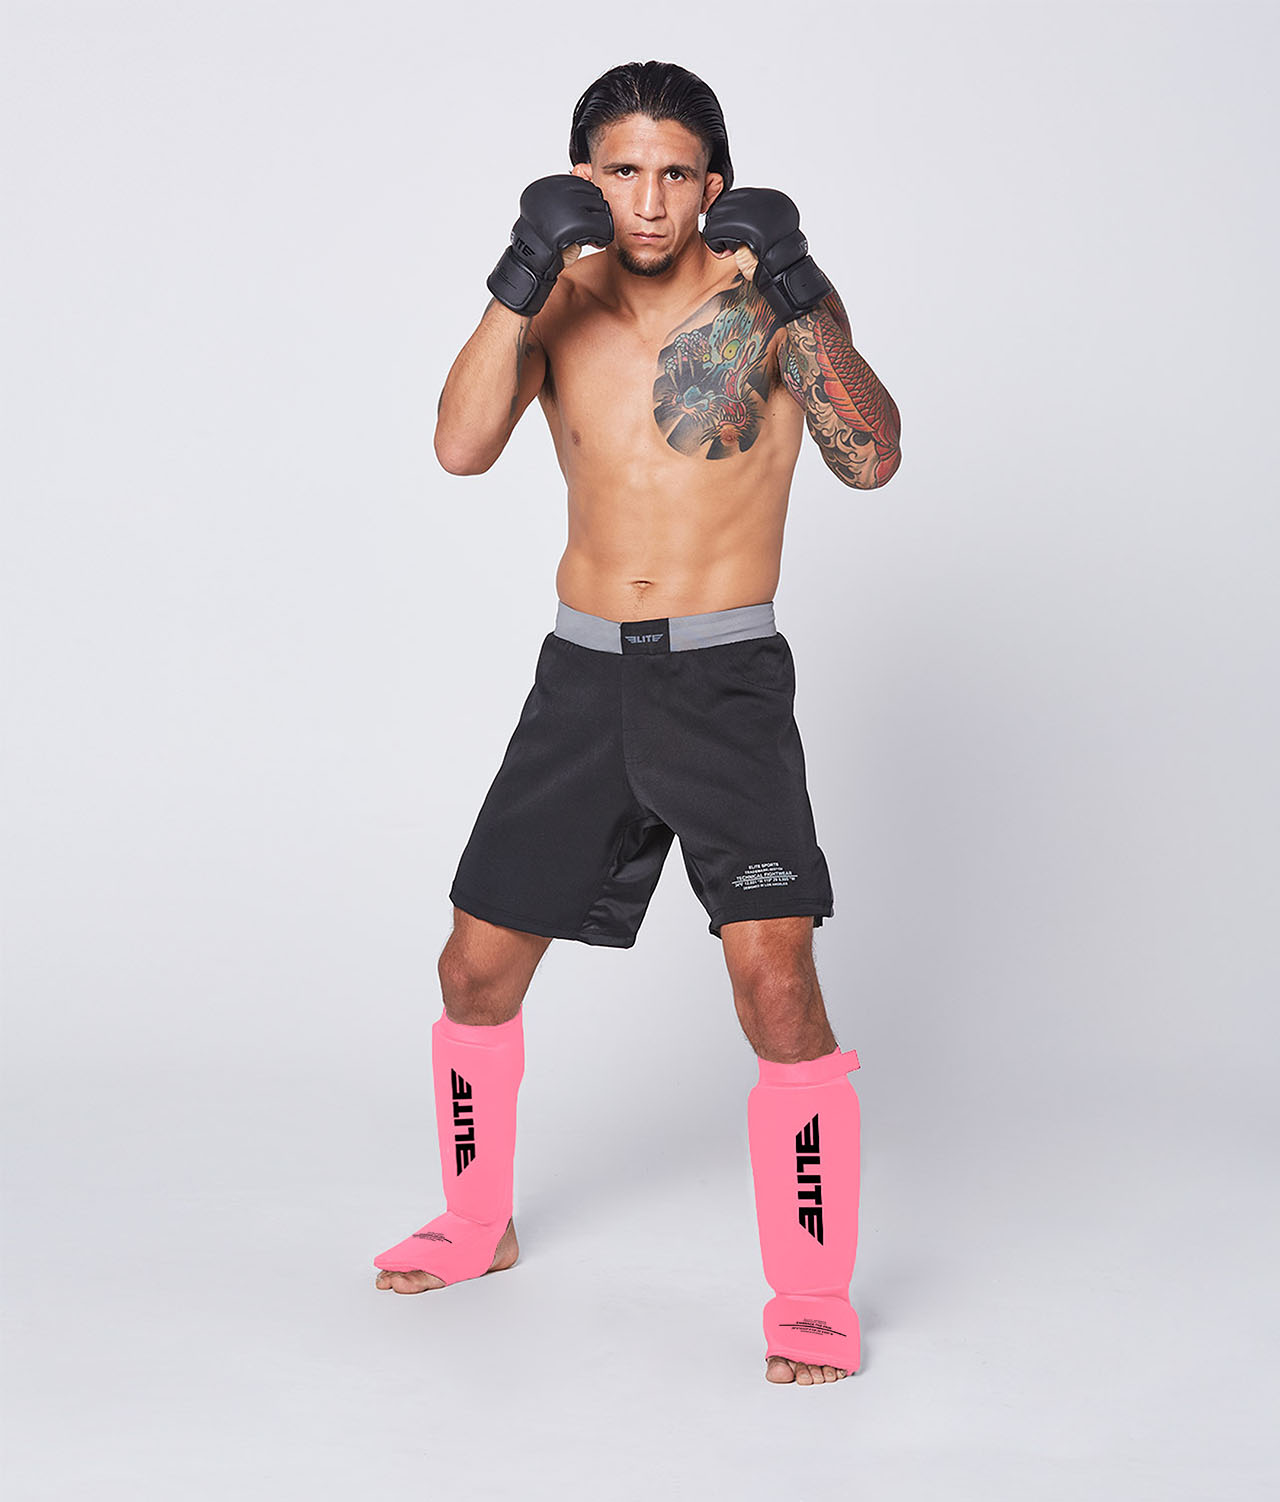 Elite Sports Adults' Standard Pink Muay Thai Shin Guards Action